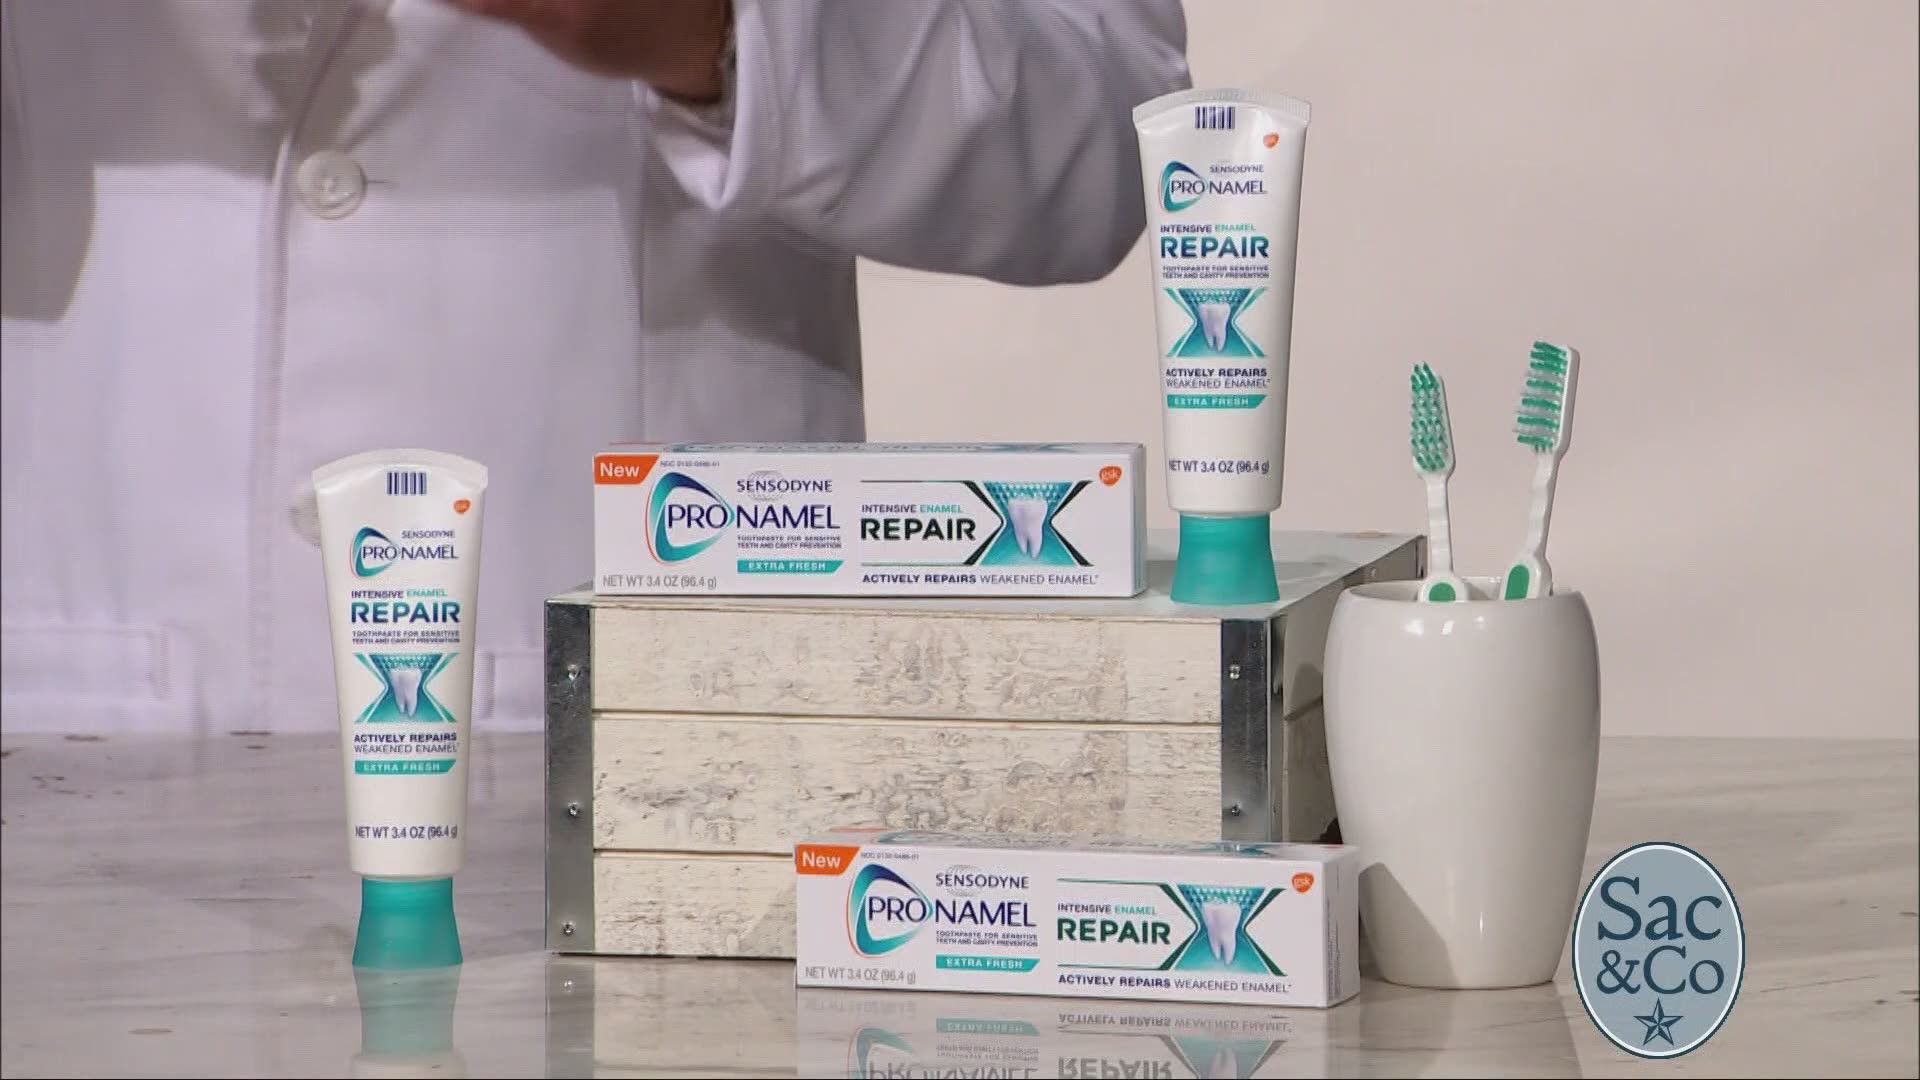 Mellisa Paul chats with Celebrity Dentist, Dr. Daniel Naysan about how to repair weakened enamel and protect your teeth! The following is a paid segment sponsored by Pronamel.